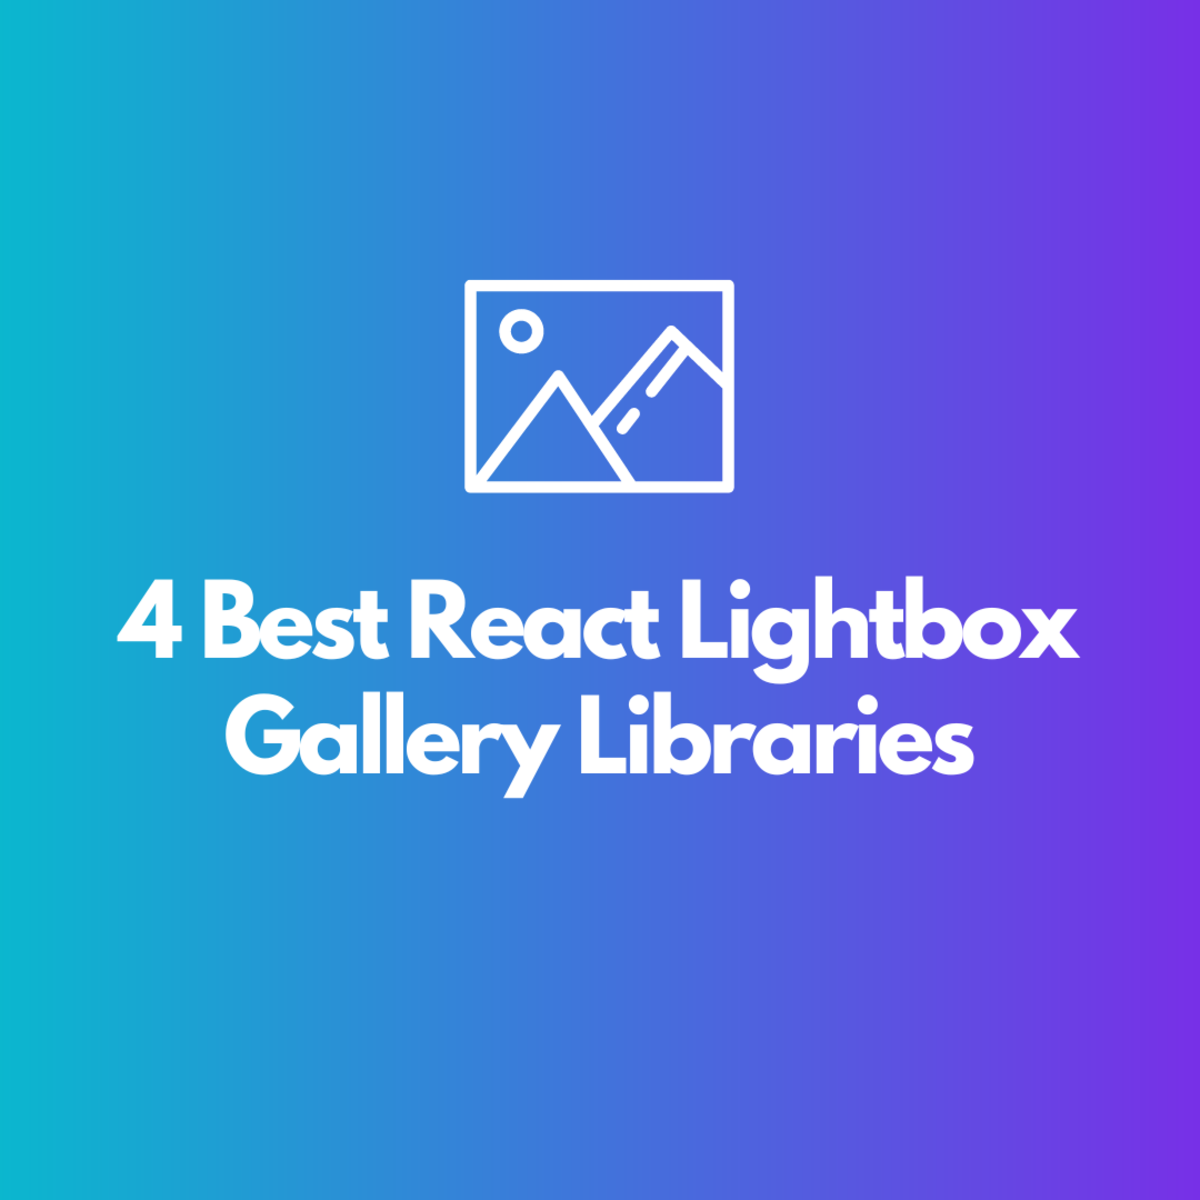 4 React Lightbox Gallery Libraries to Check Out: The Ultimate List